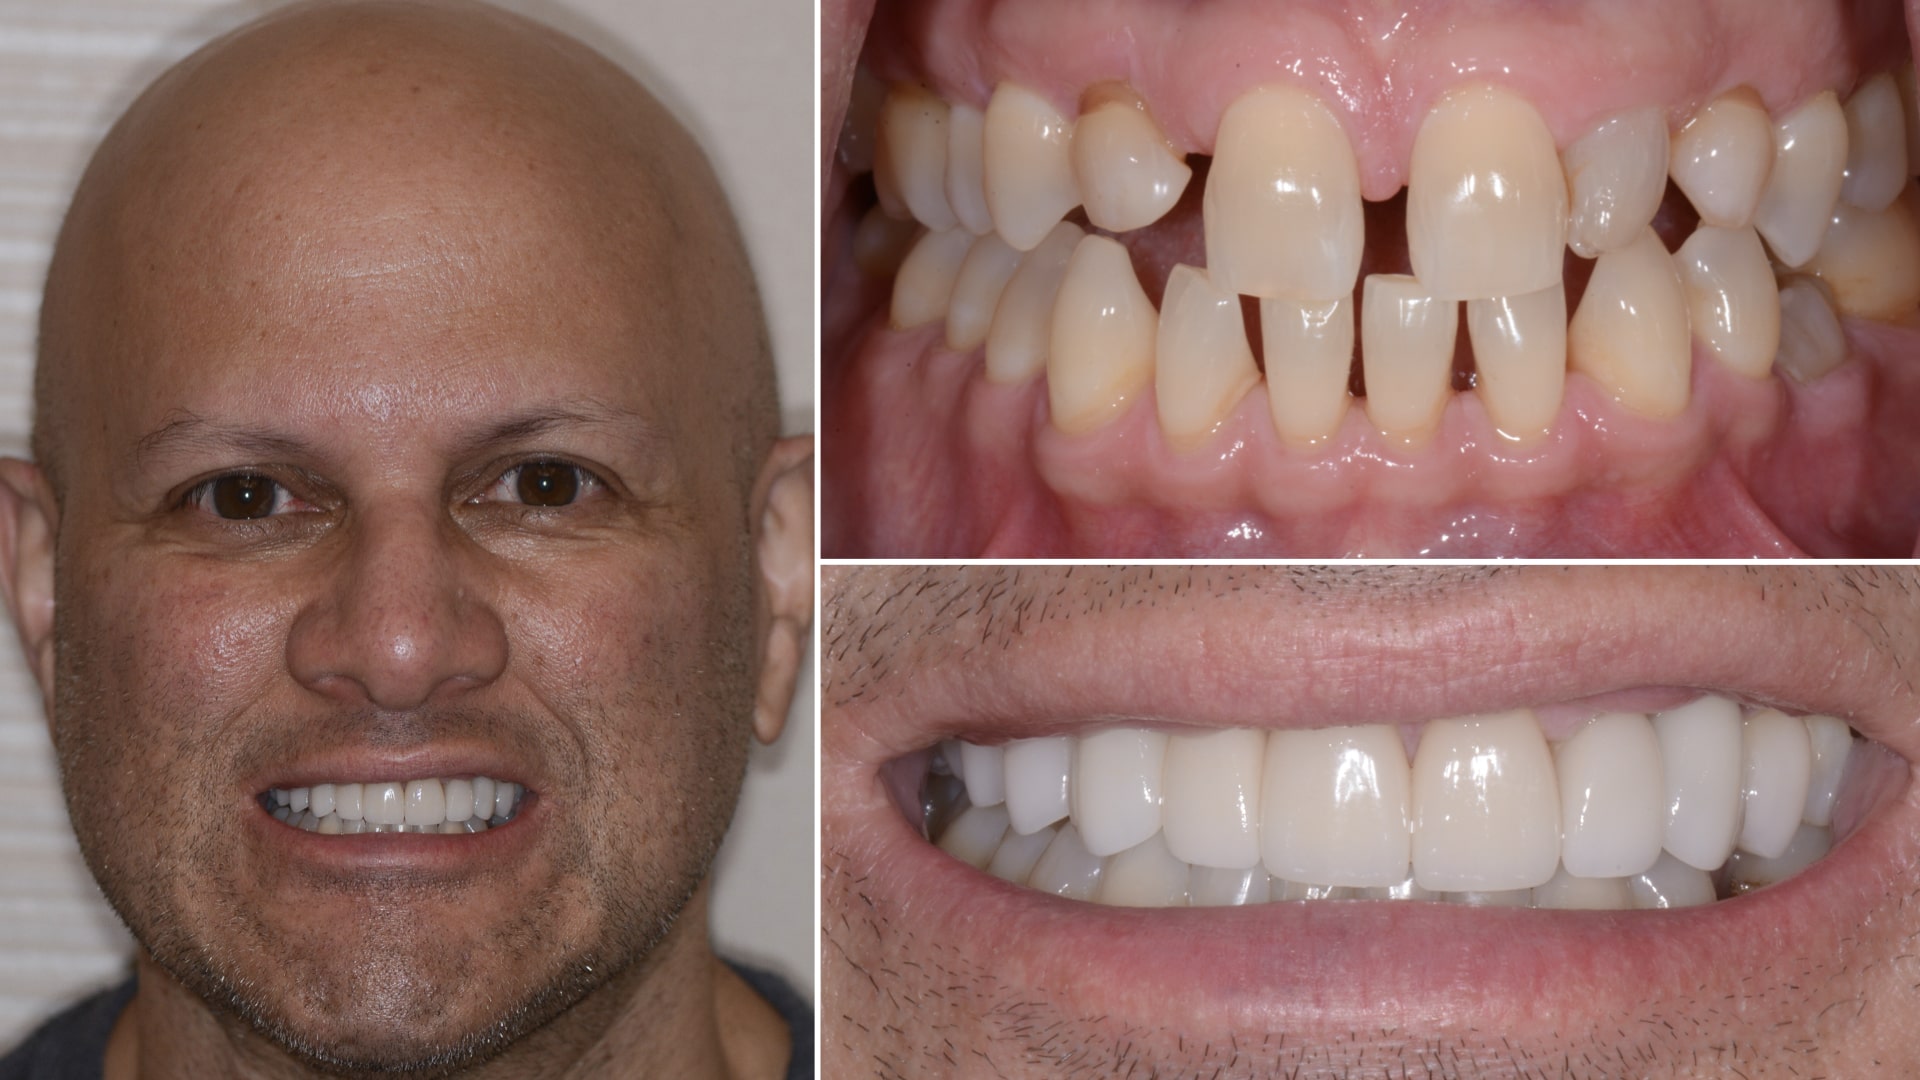 Man's smile before and after treatment to address gaps between teeth